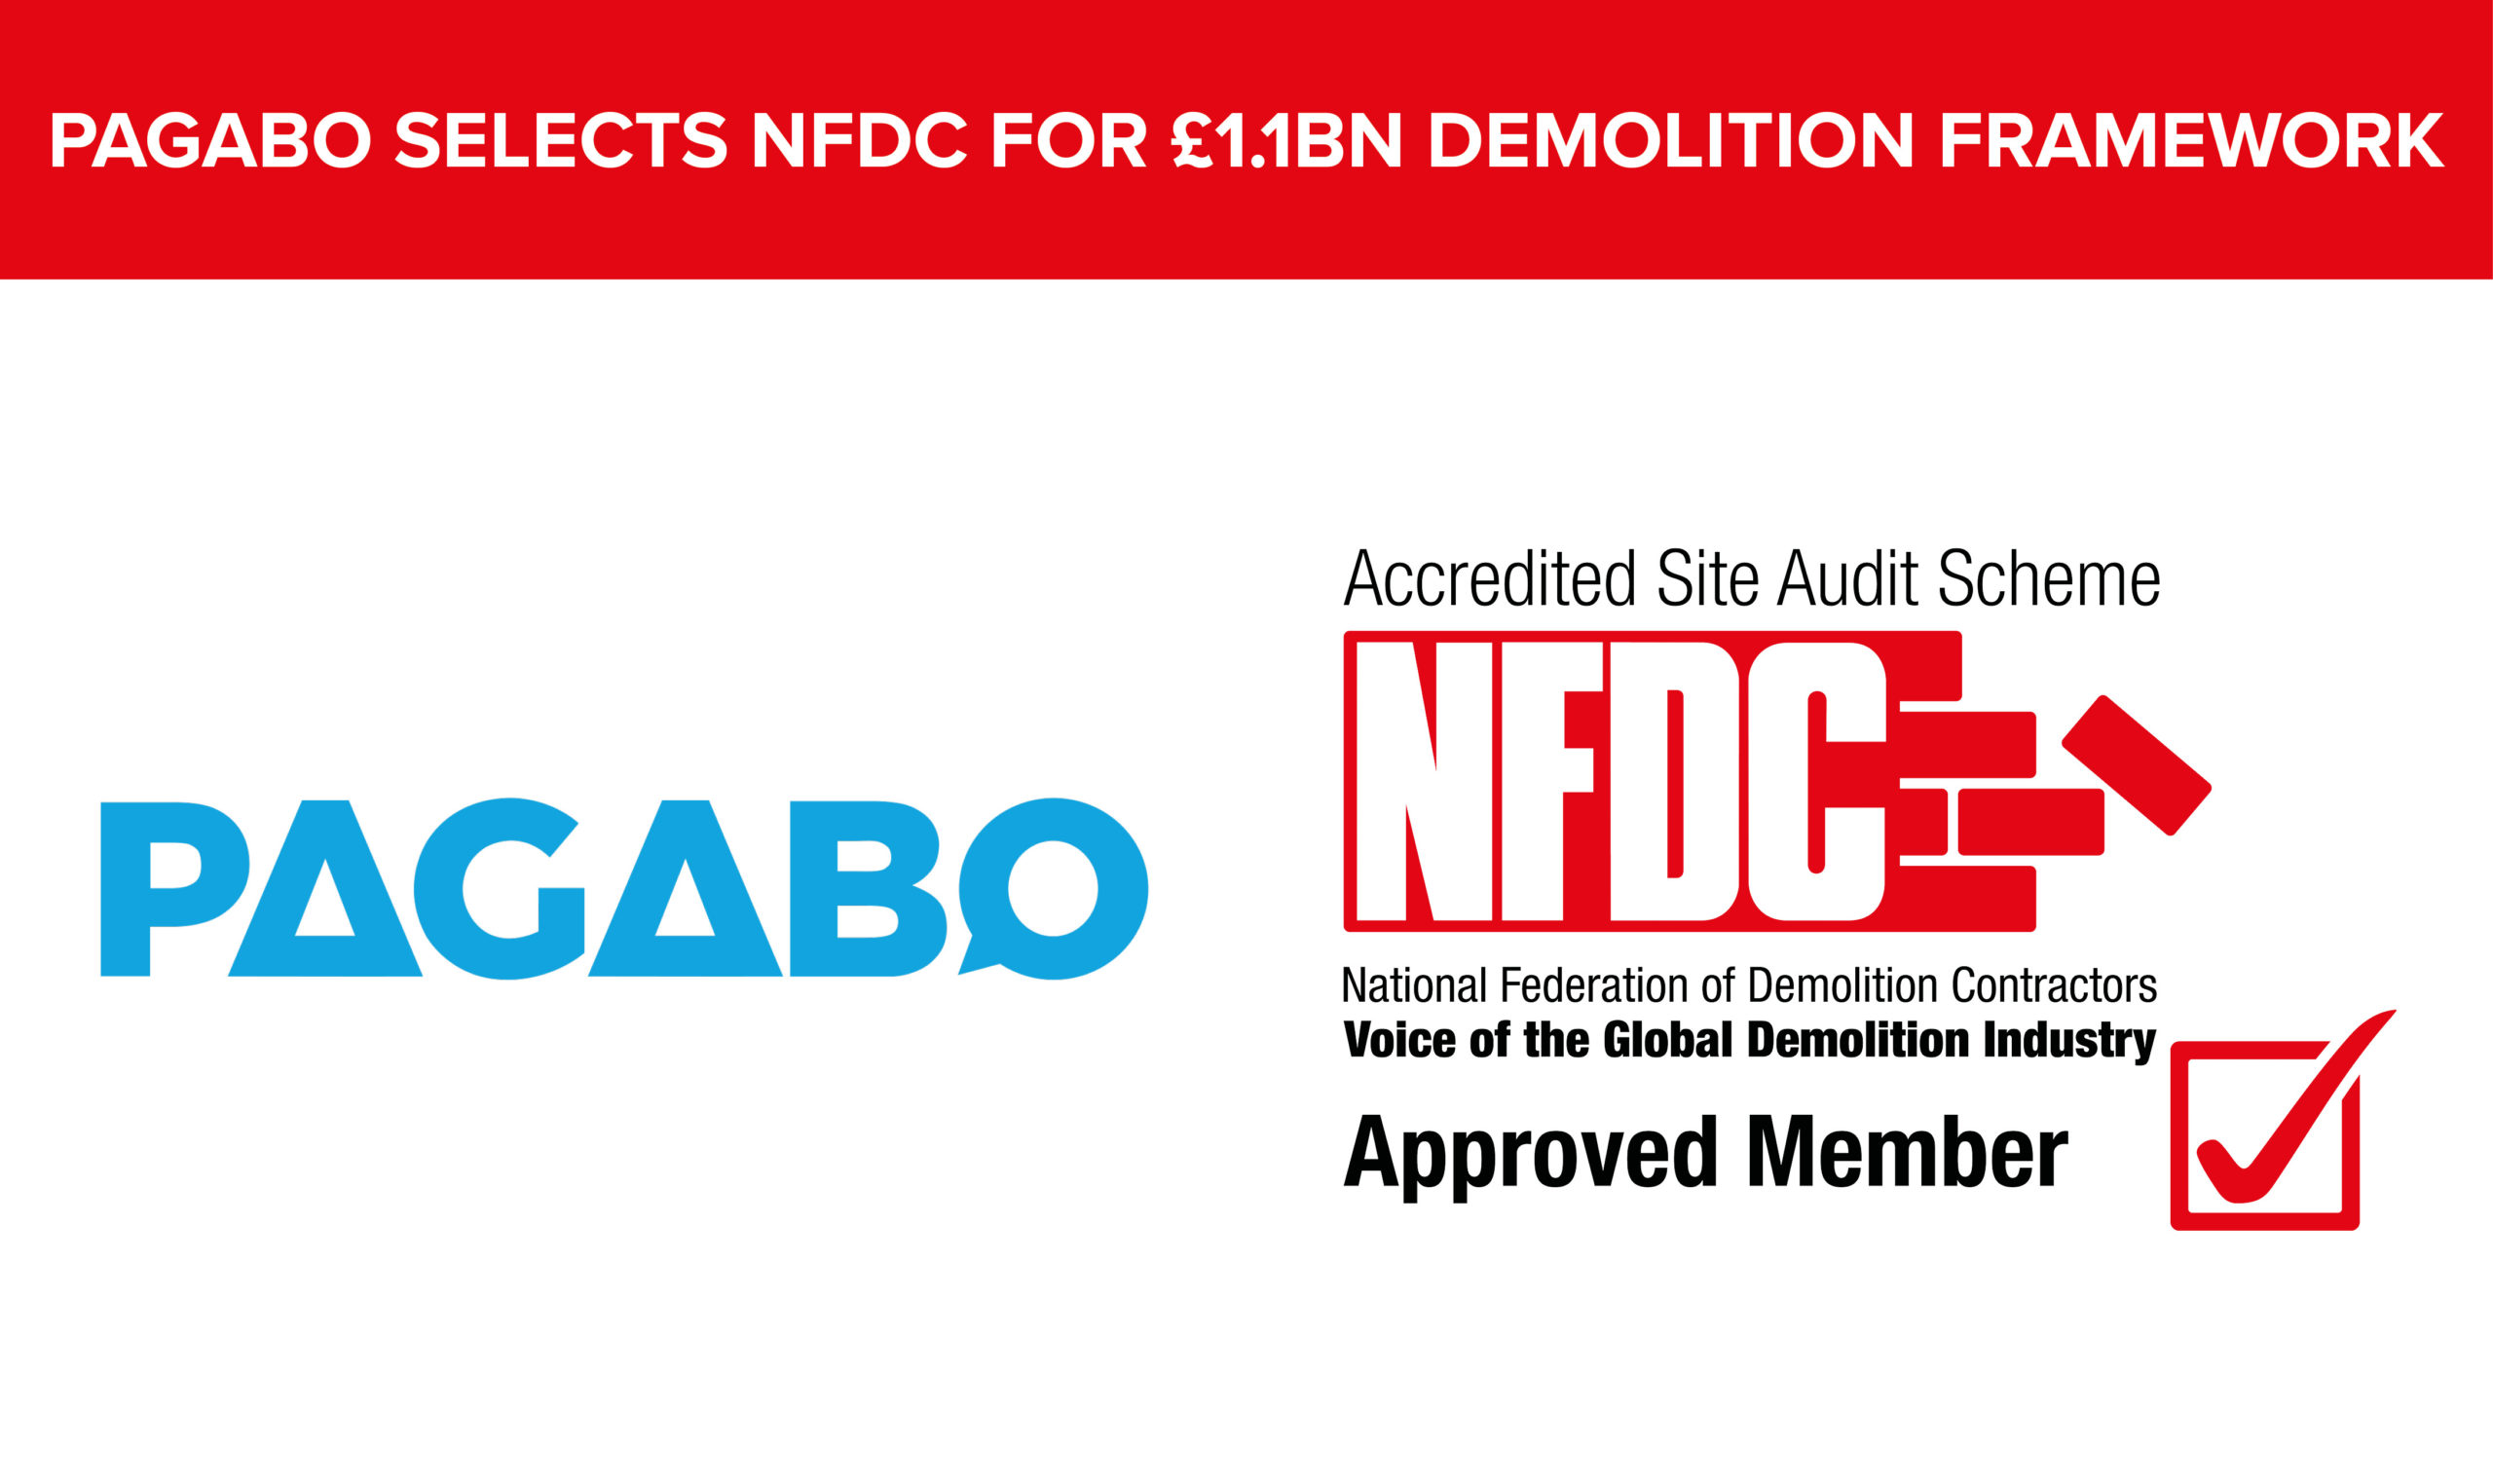 Pagabo selects NFDC for £1.1bn demolition framework